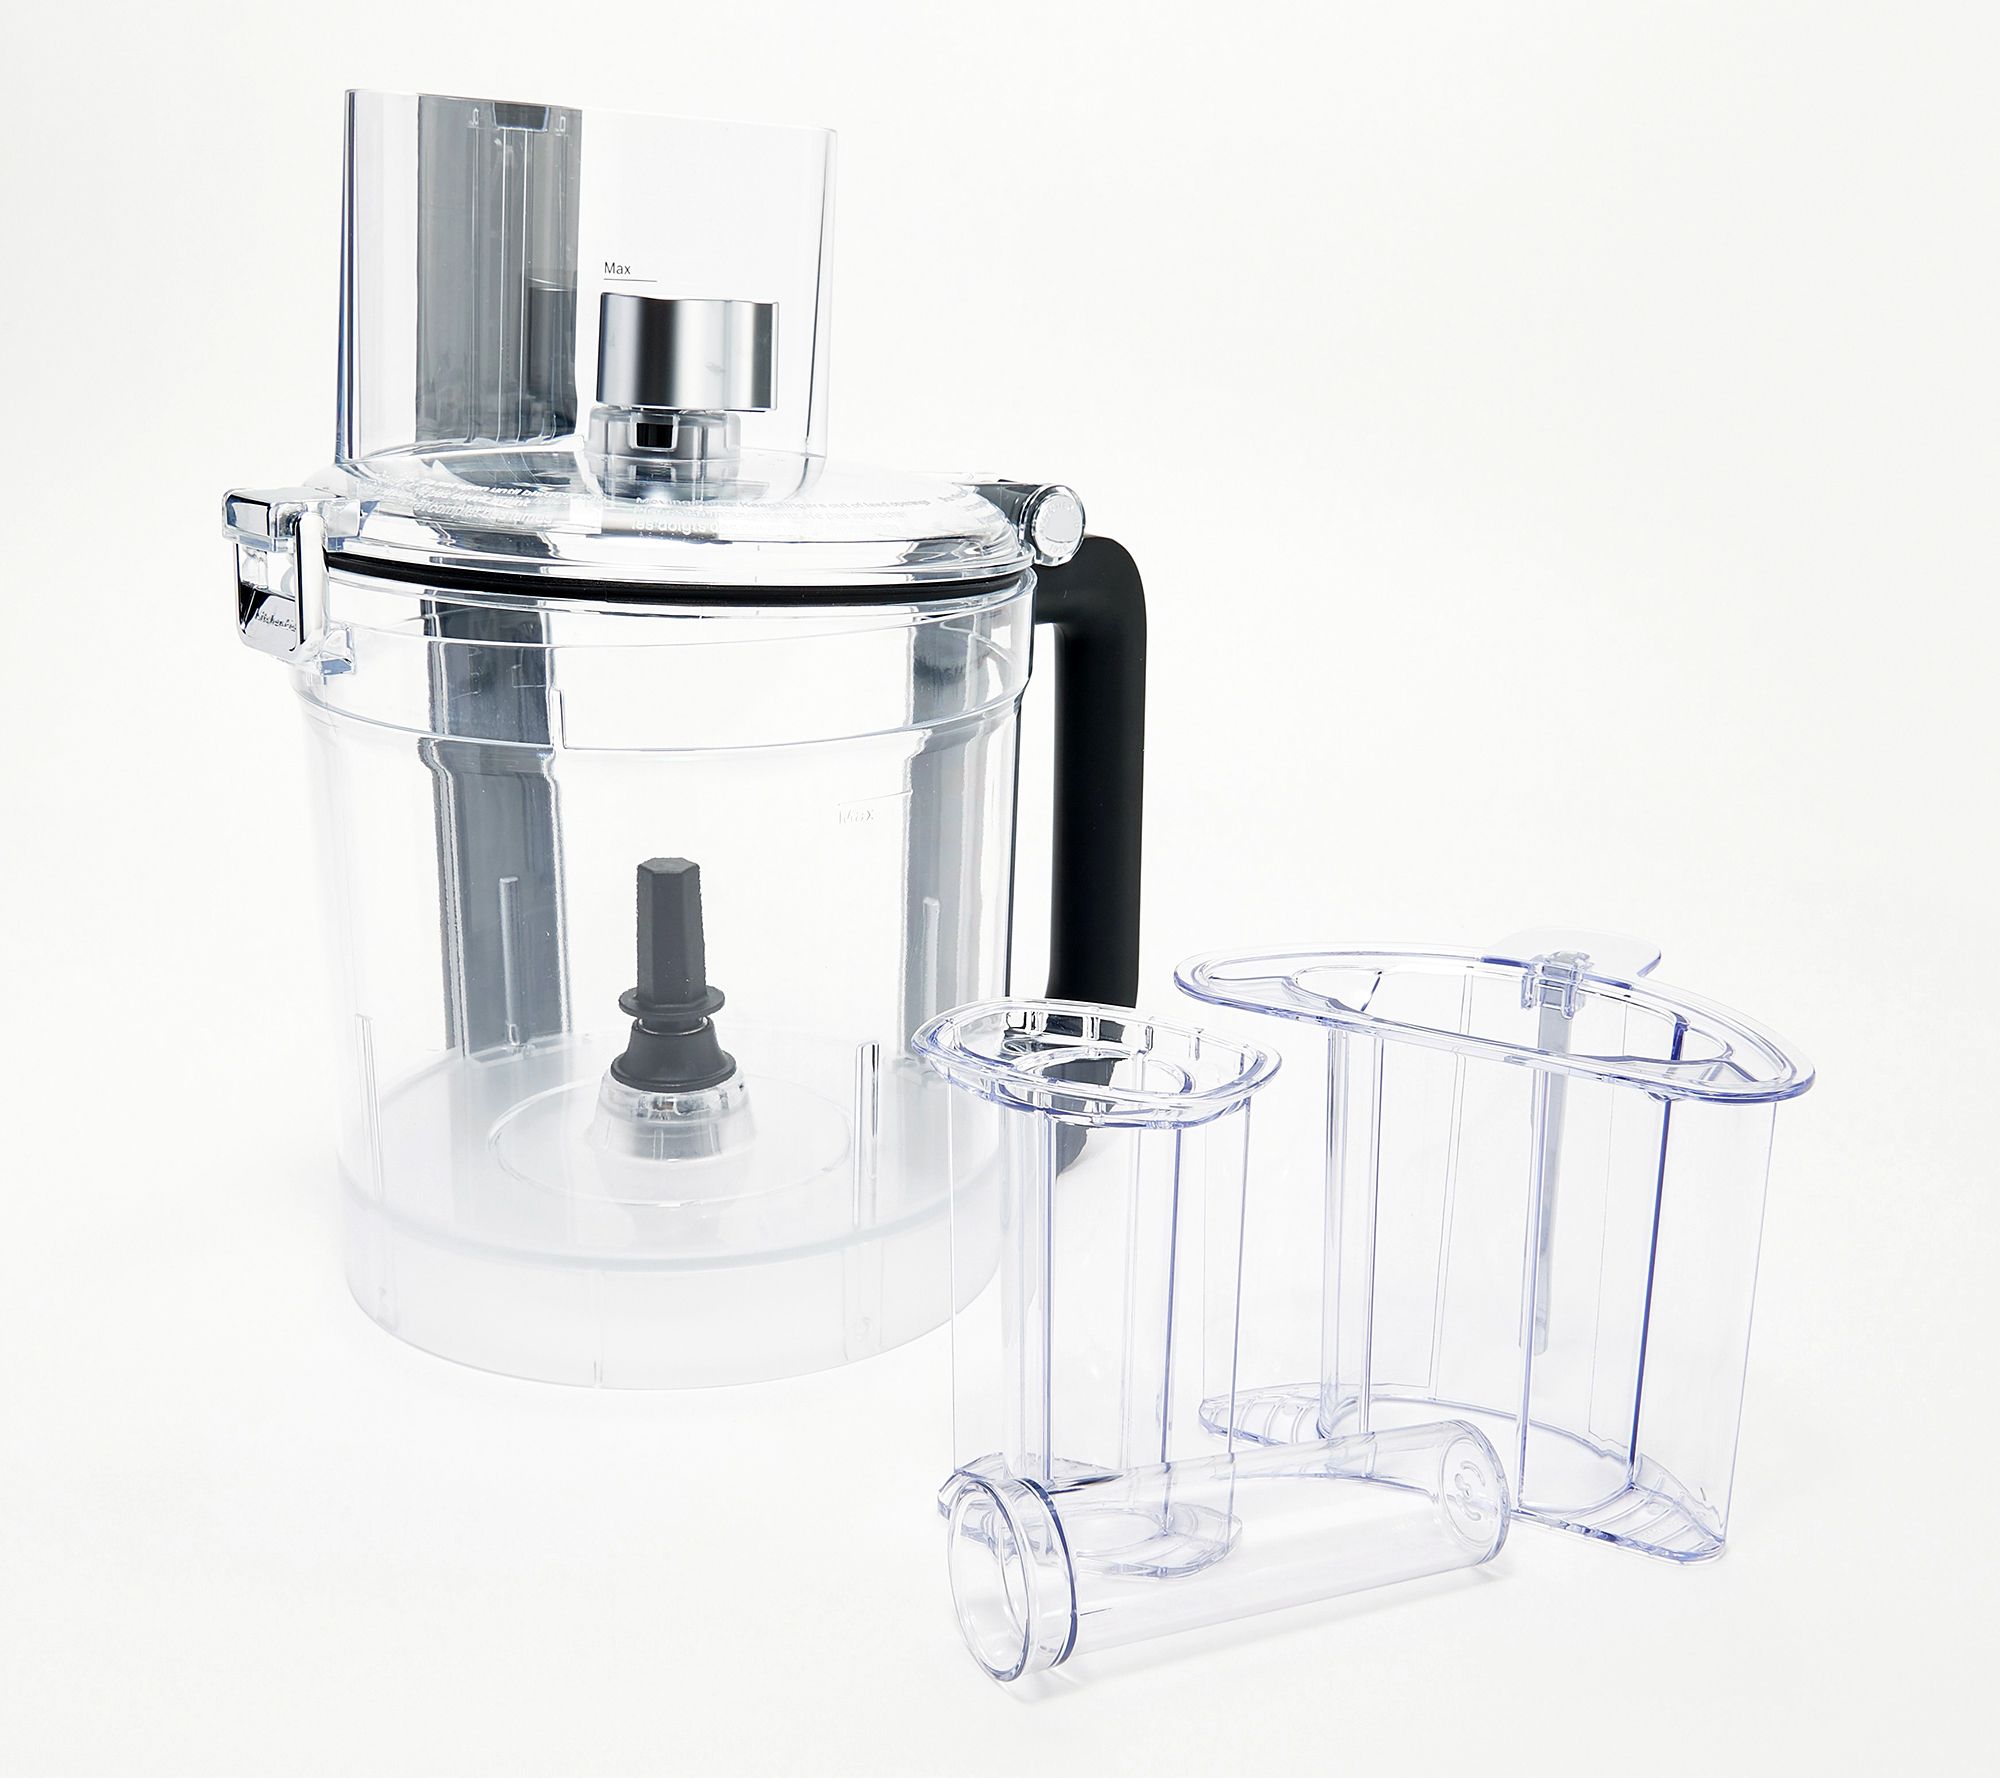 KFP1319WH by KitchenAid - 13-Cup Food Processor with Dicing Kit